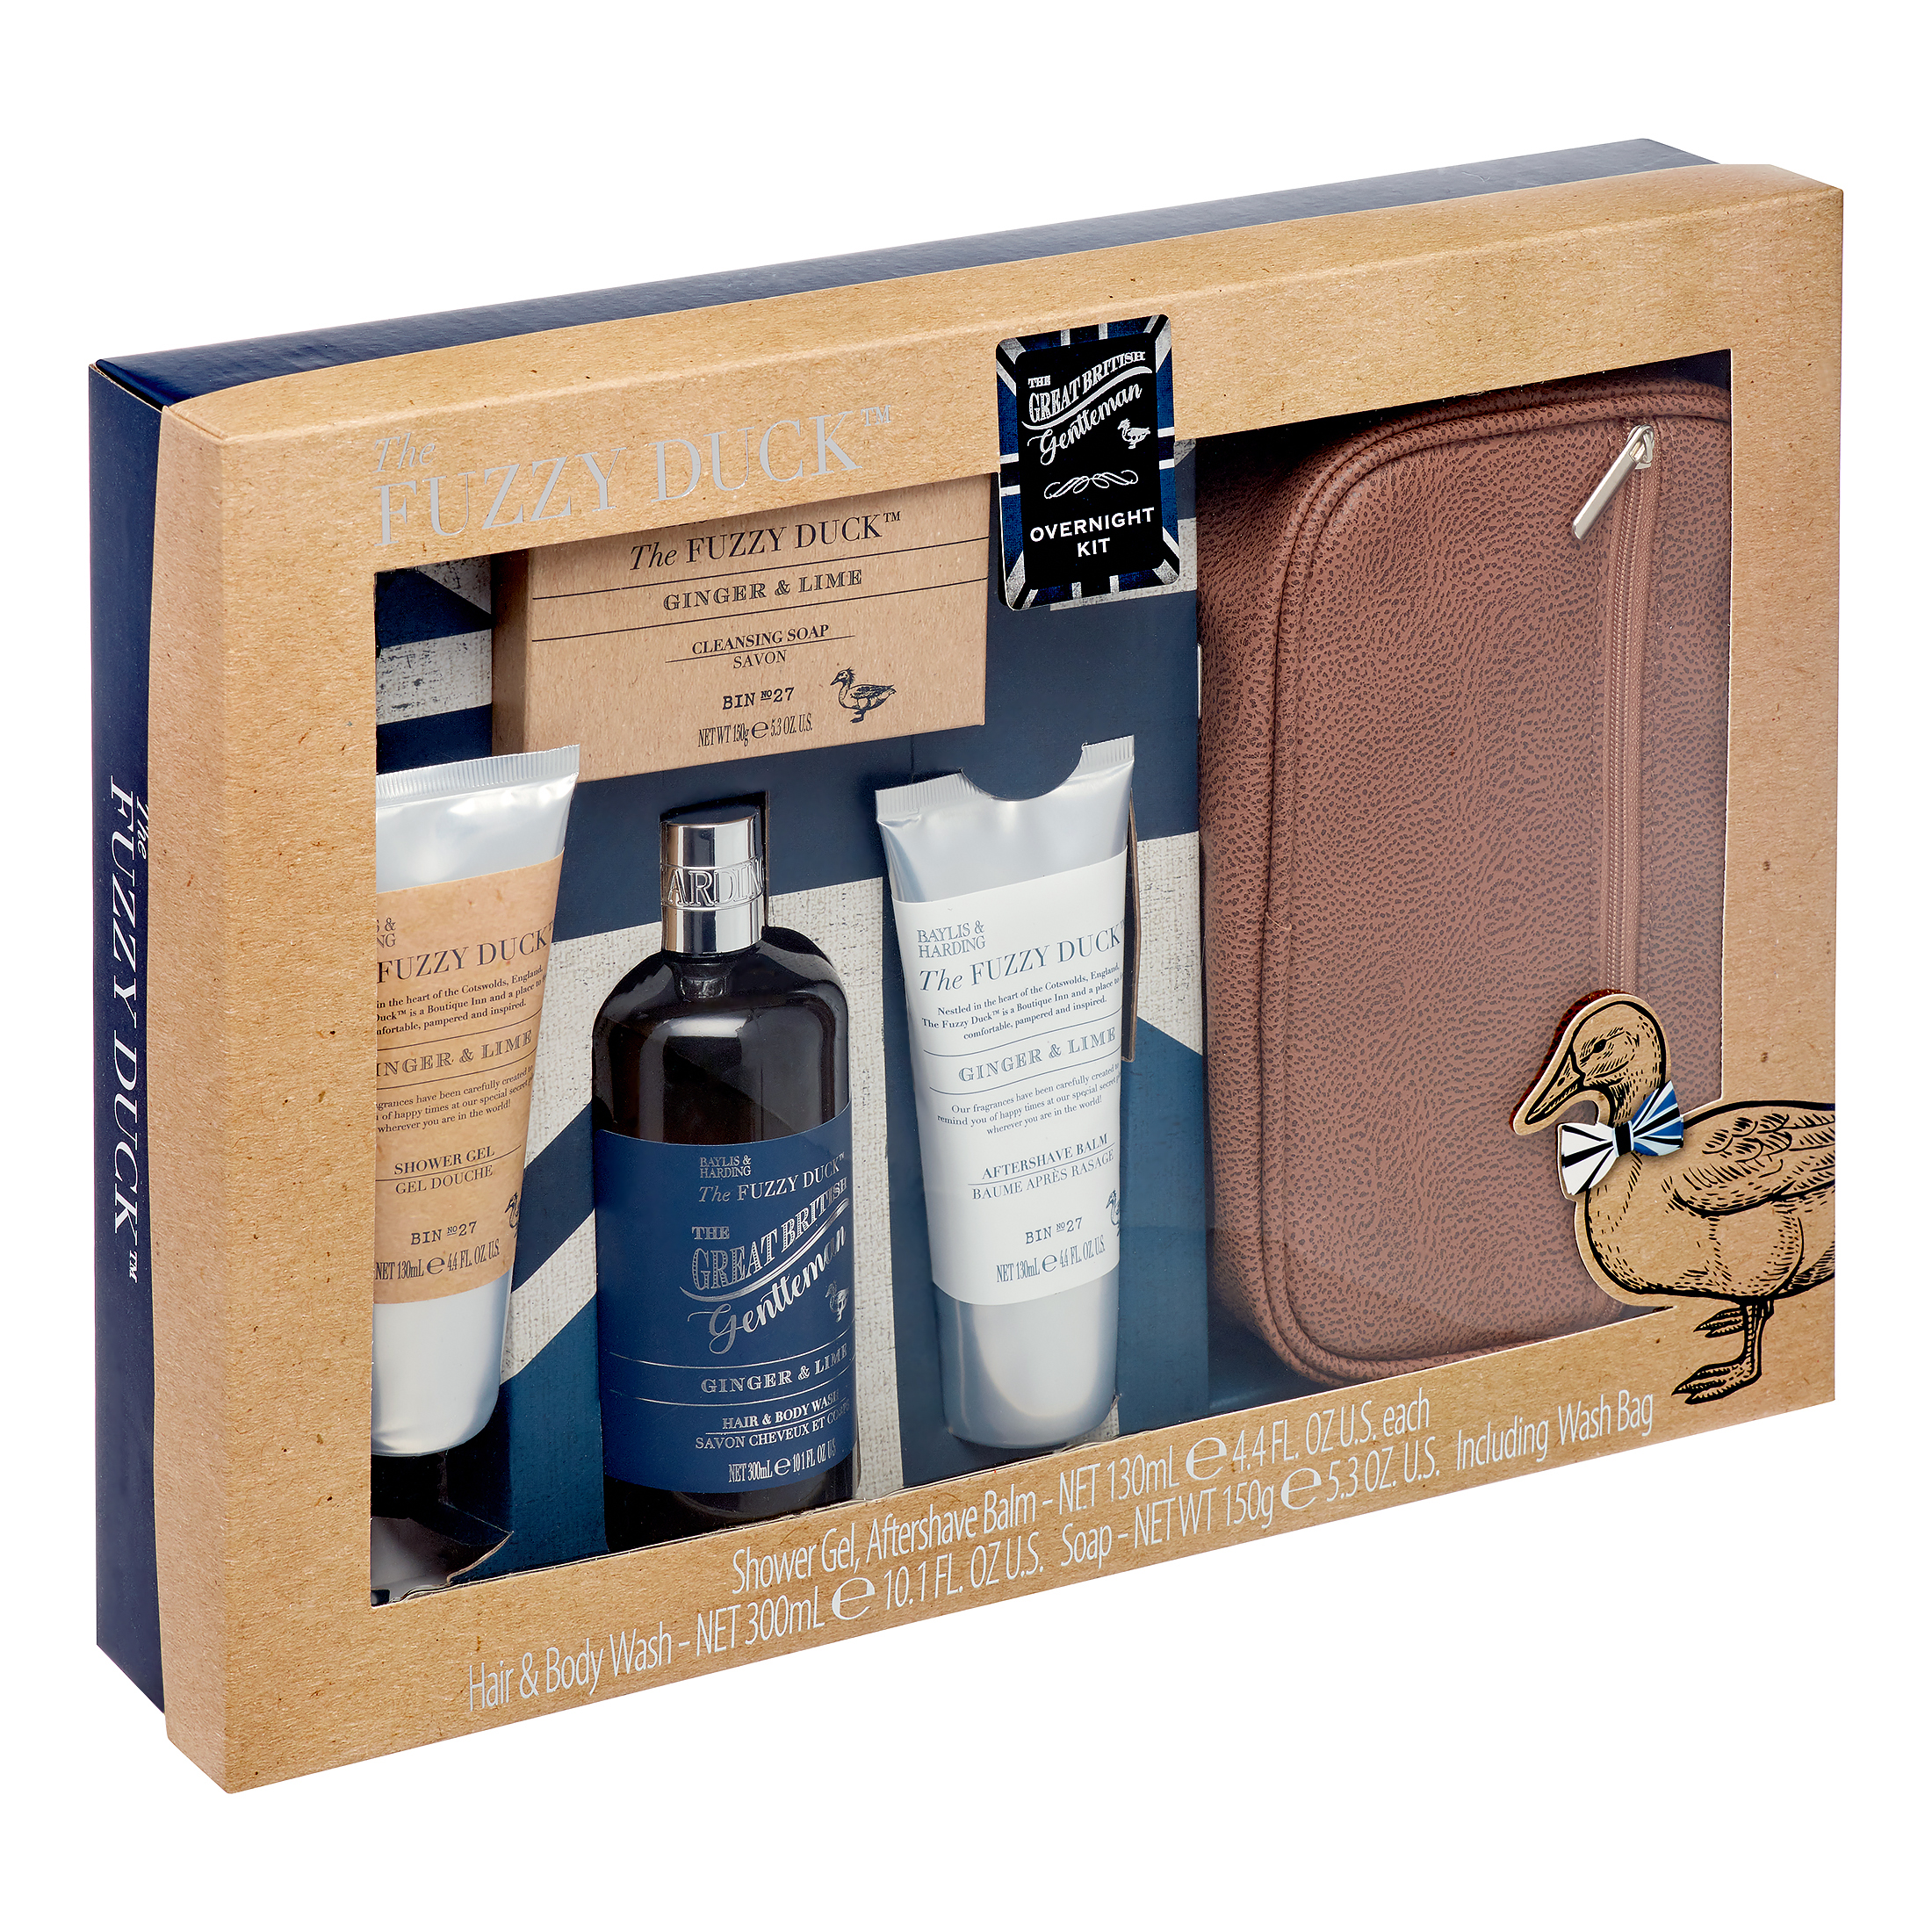 Baylis & Harding The Fuzzy Duck Ginger and Lime Collection Great British Gentlemen Overnight Kit Gift Set for Men - image 3 of 7